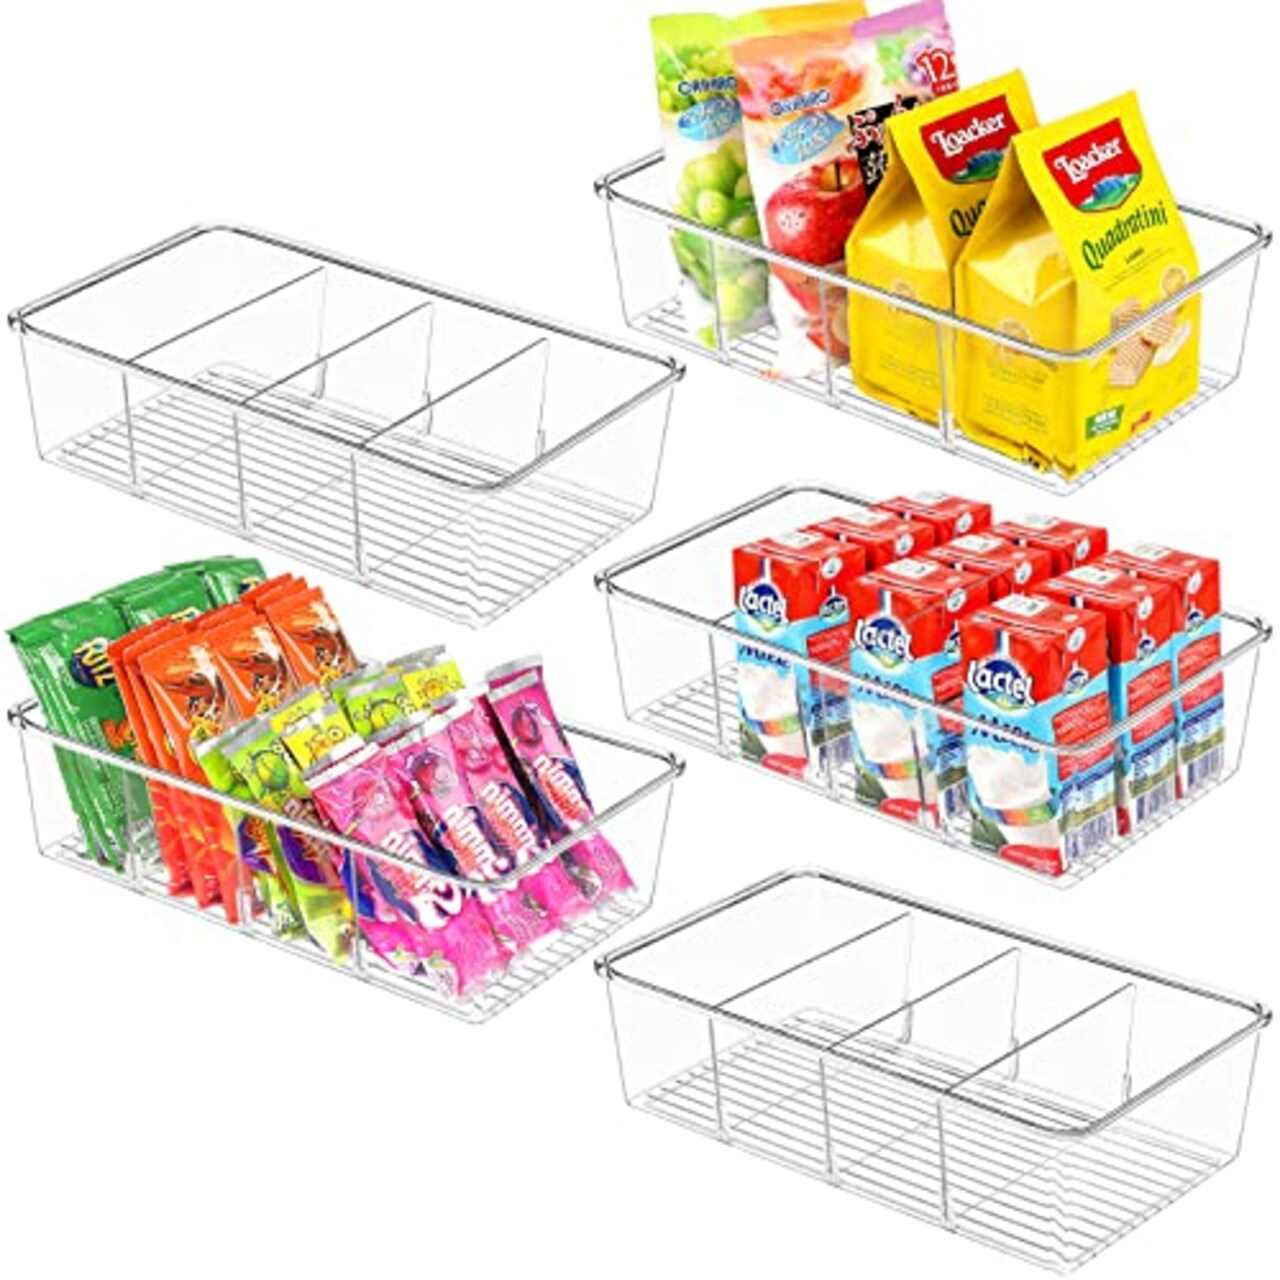 ZIZOTI 5 Pack Food Storage Organizer Bins Clear Plastic Removable Pantry  Organization Racks with 3 Dividers, Kitchen, Cabinets Snacks, Packets,  Spices, Pouches Stackable Bins